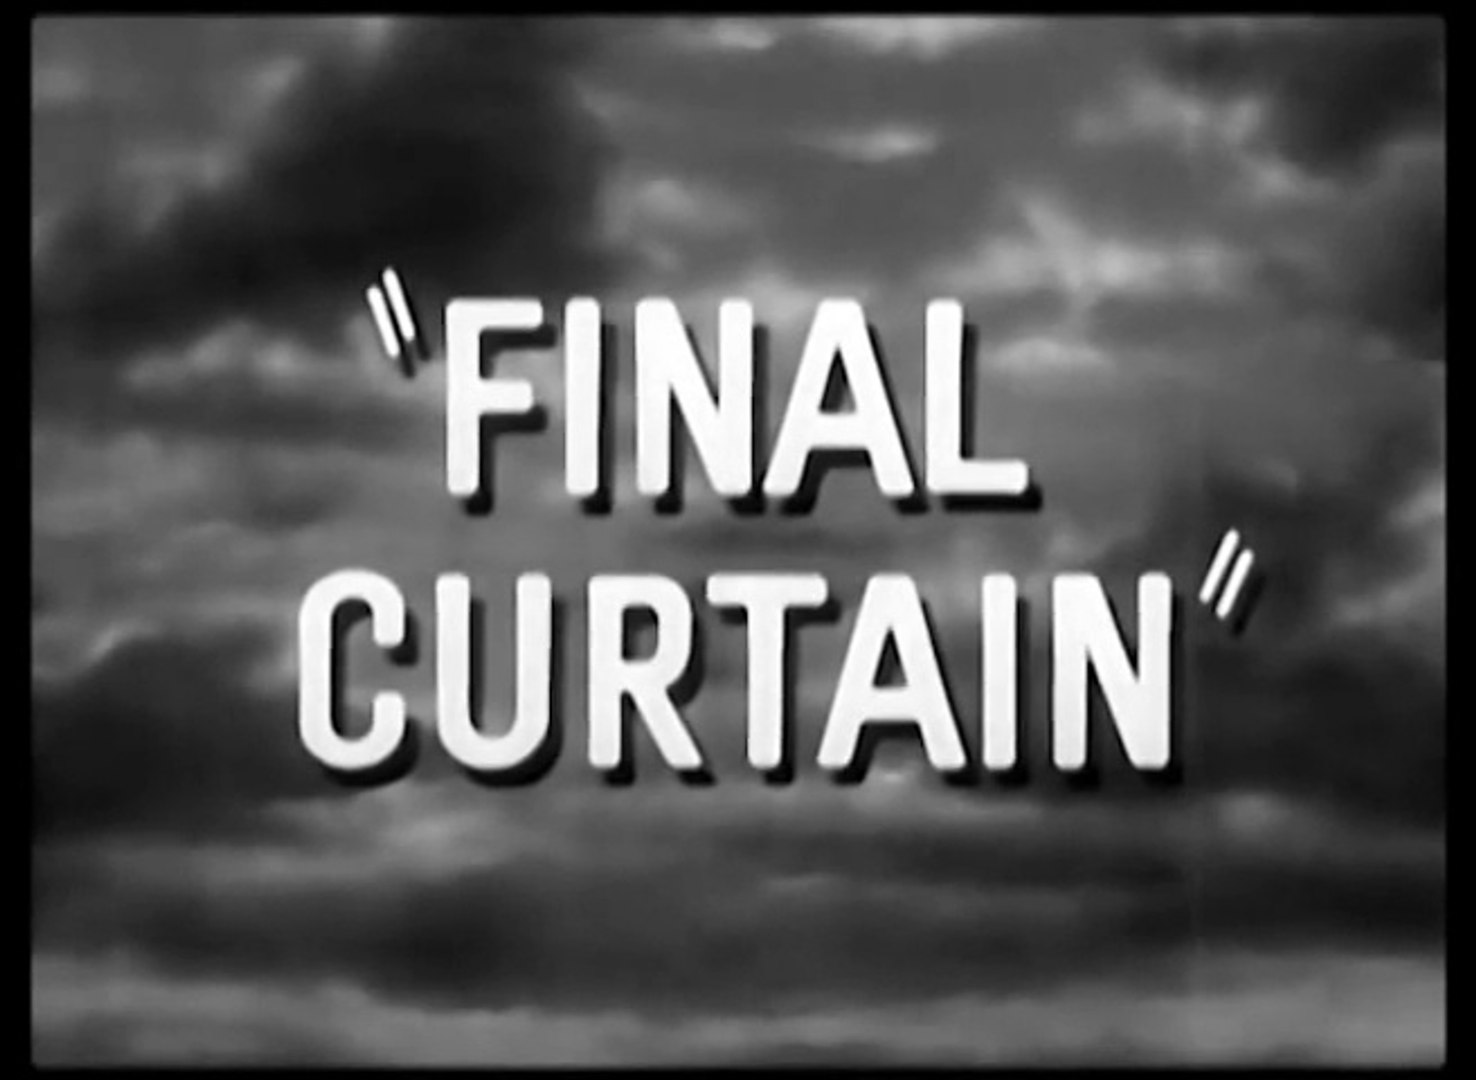 Final Curtain (1957) Directed by Ed Wood Jr.